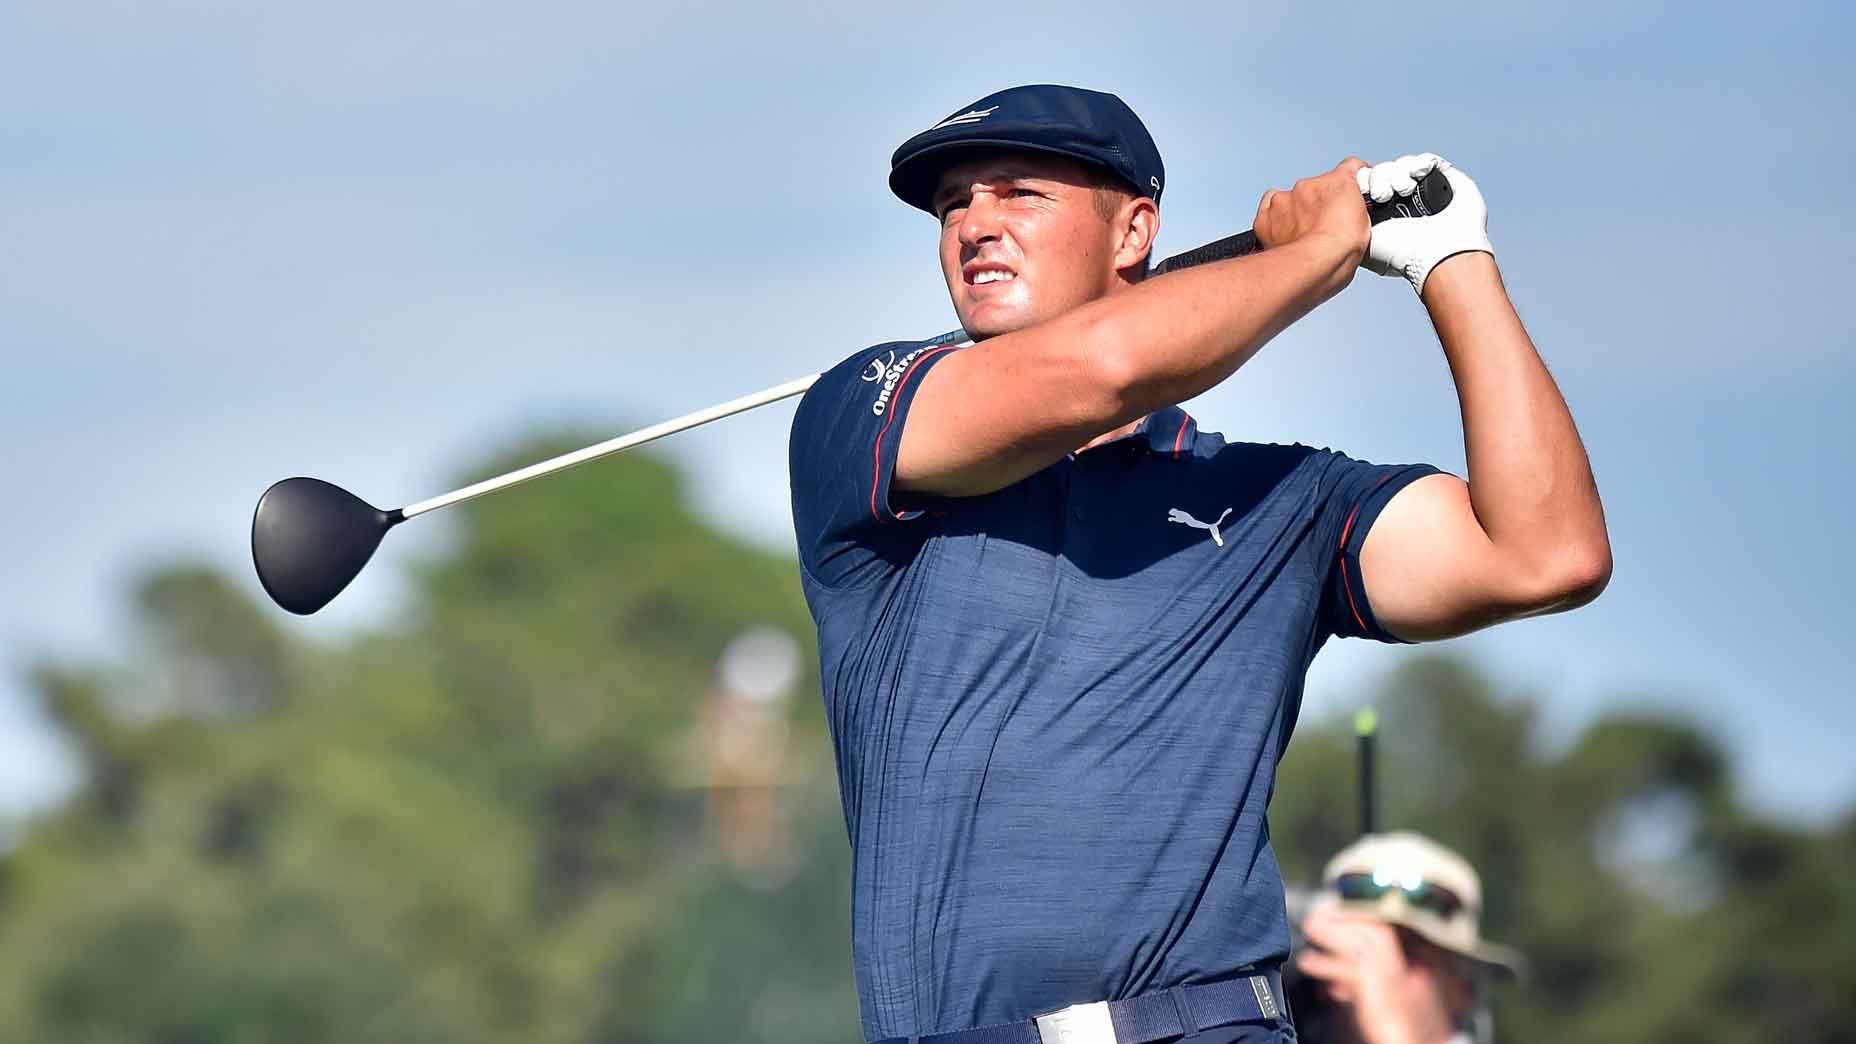 Bryson DeChambeau in finish position with driver